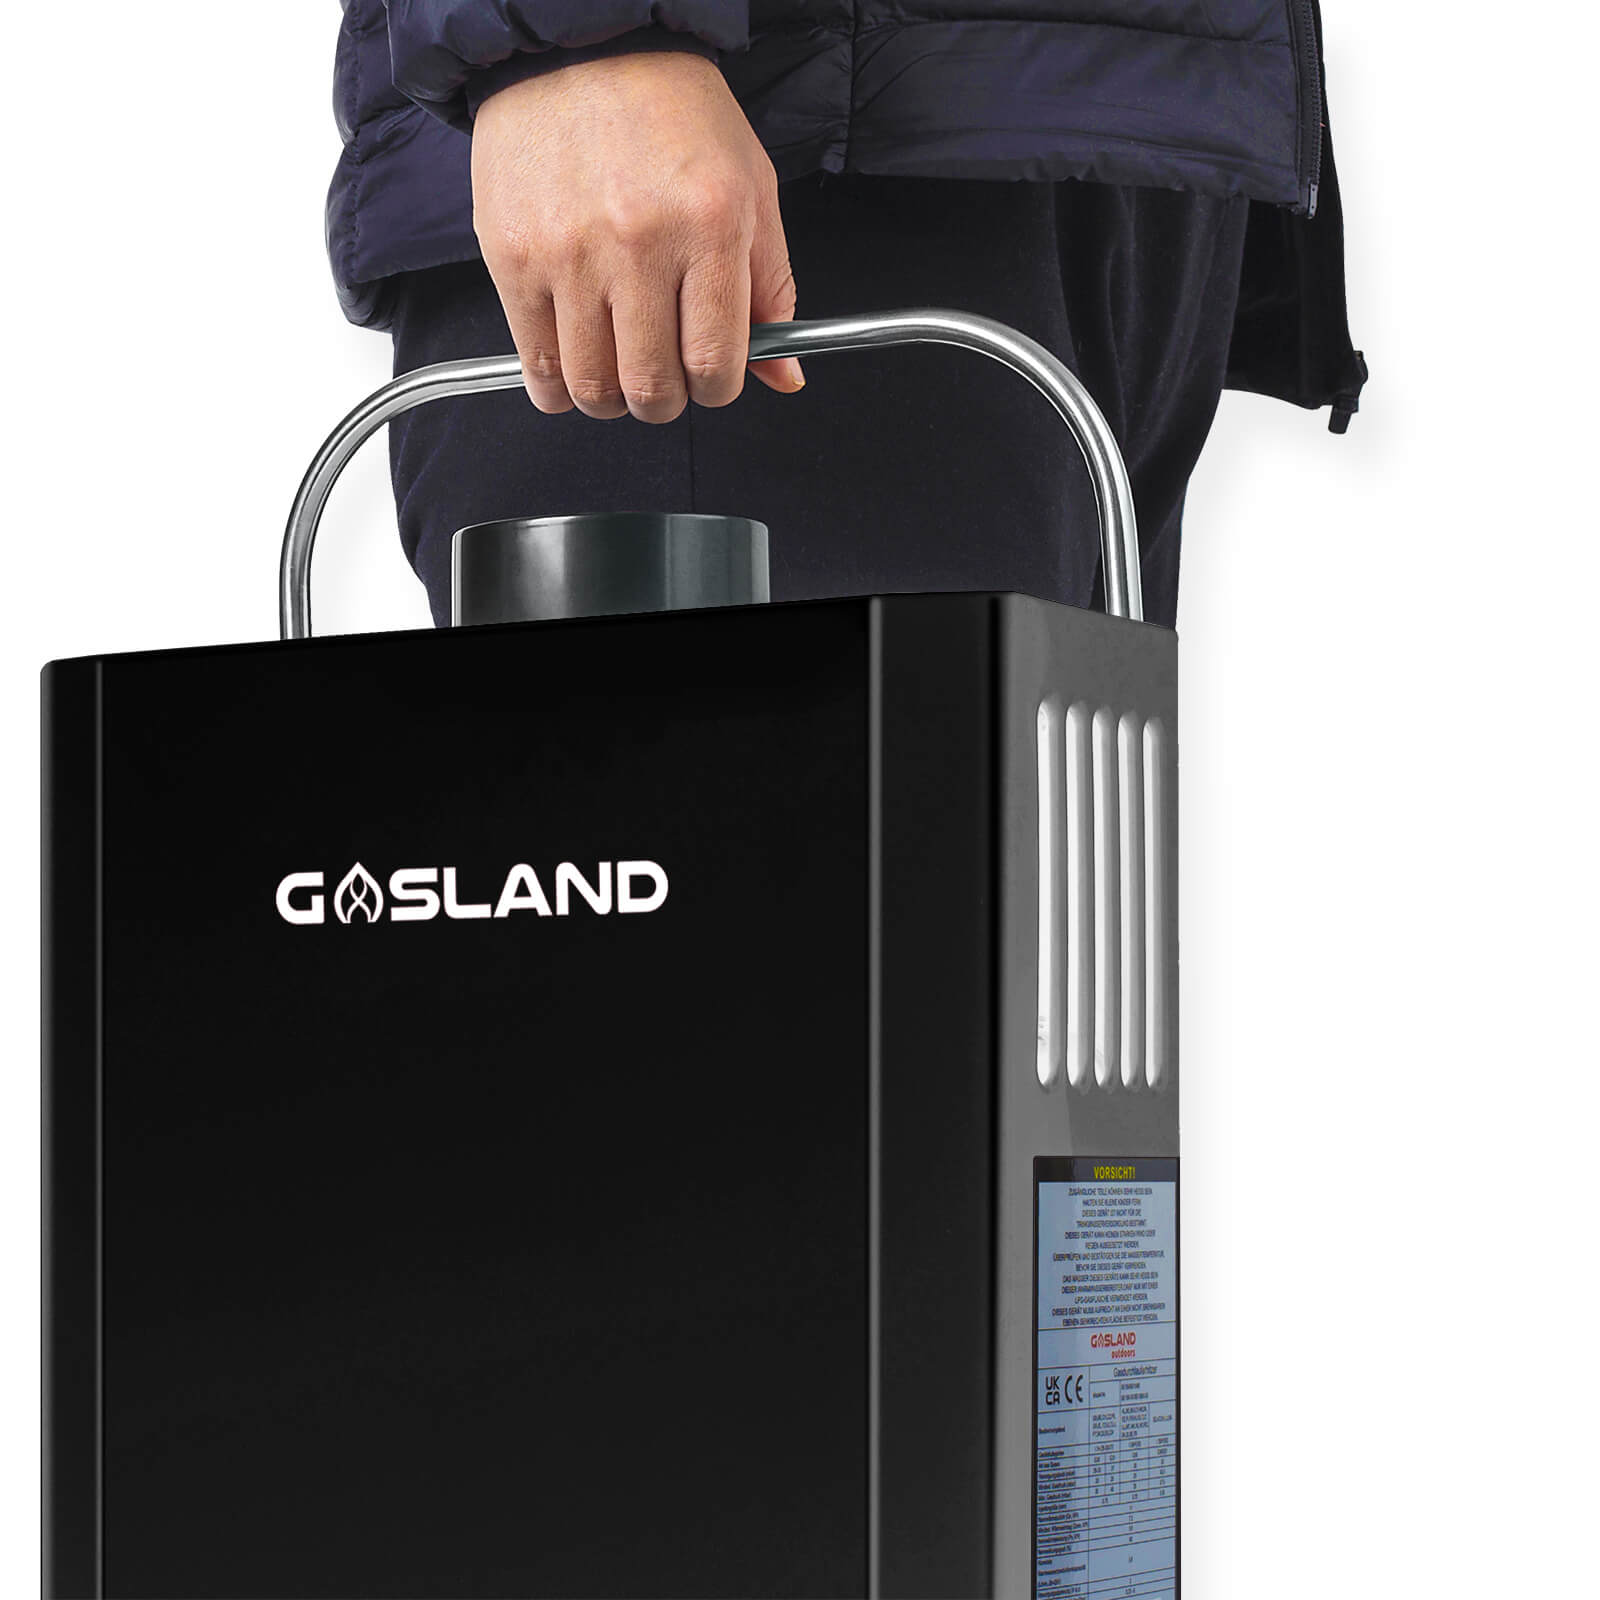 GASLAND BE158B 6L Gas Water Heater, Freestanding Tankless Hot Shower System with Portable Handle, Instant LPG Water Boiler for Campervan Shower Road Trip Hot Tap Lpg Shower